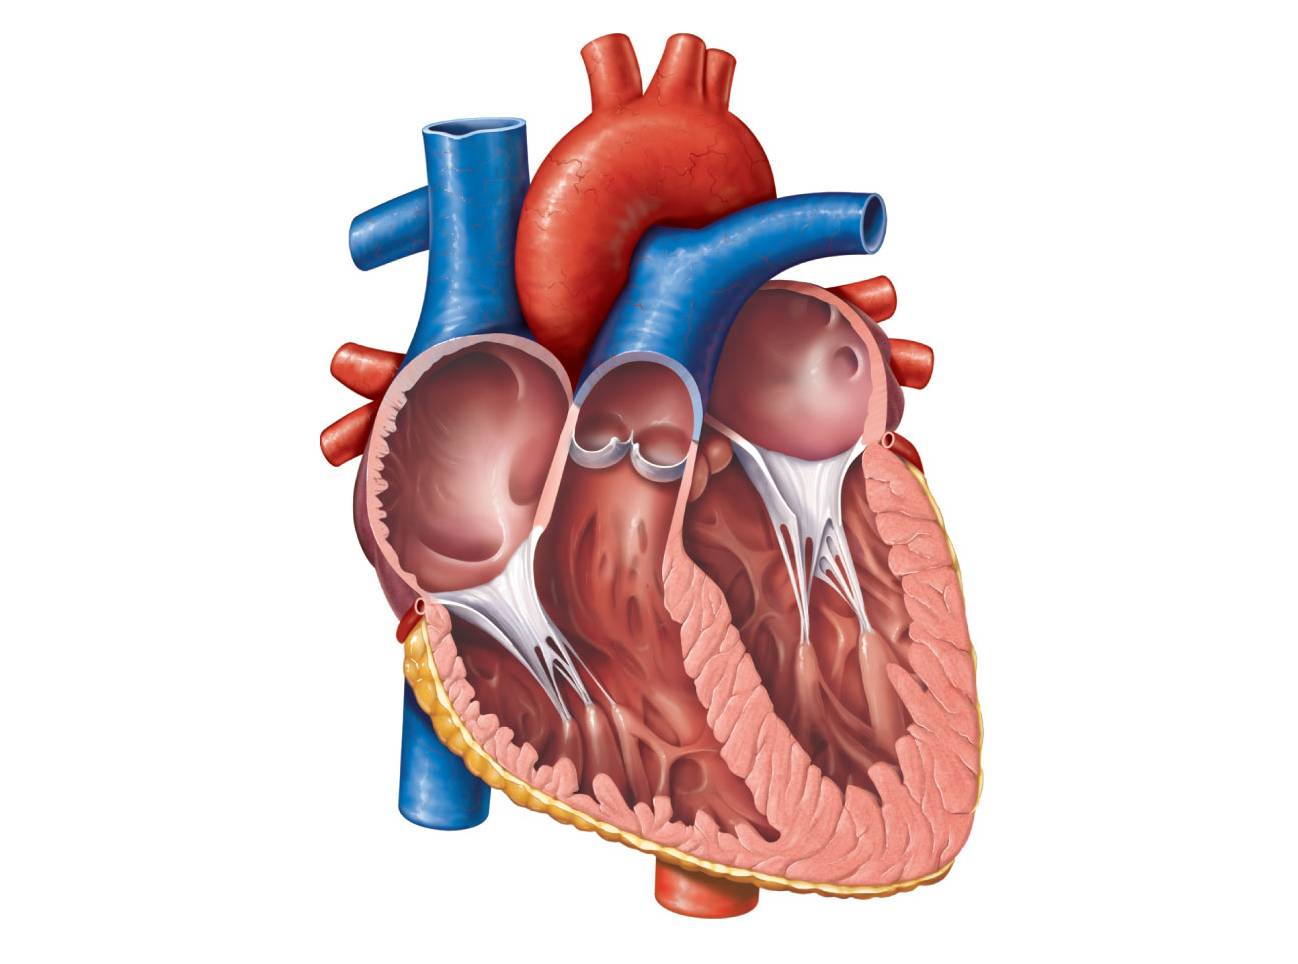 Unlabelled Diagram Of The Heart# - Clipart library